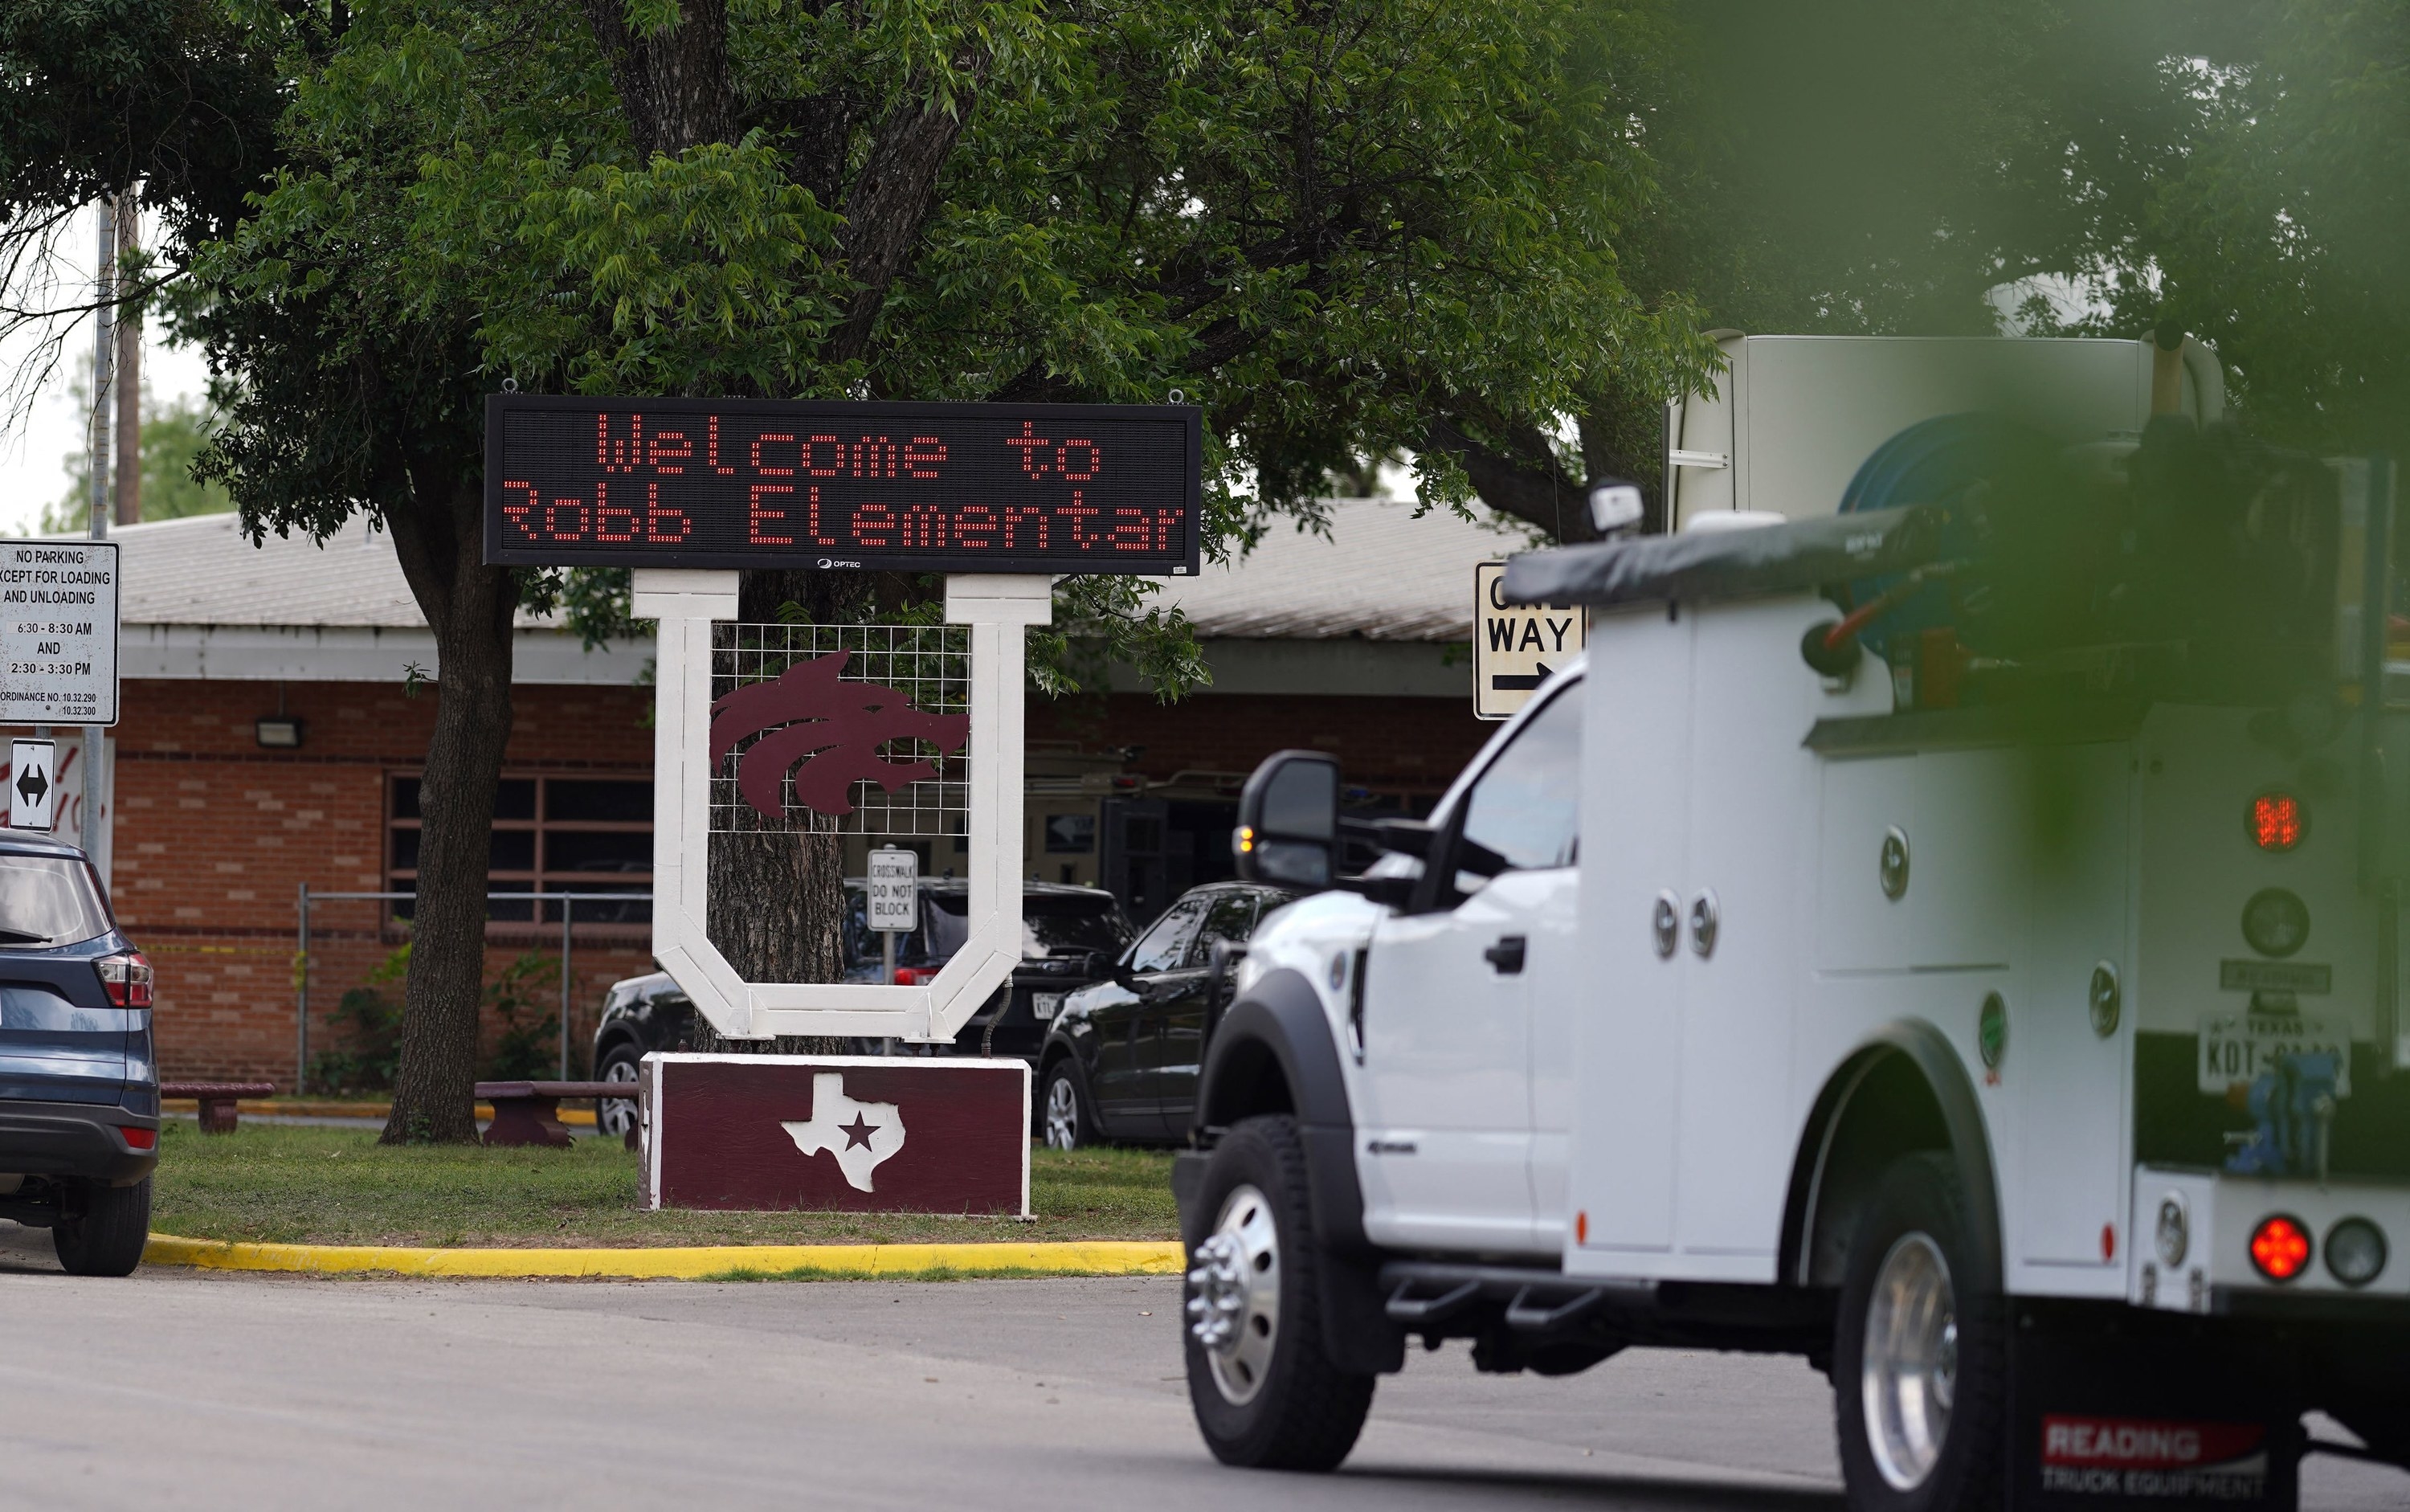 An electronic sign outside reads &quot;Welcome to Robb Elementary&quot; over a large wooden U and a placard of the state of Texas with a star in the middle